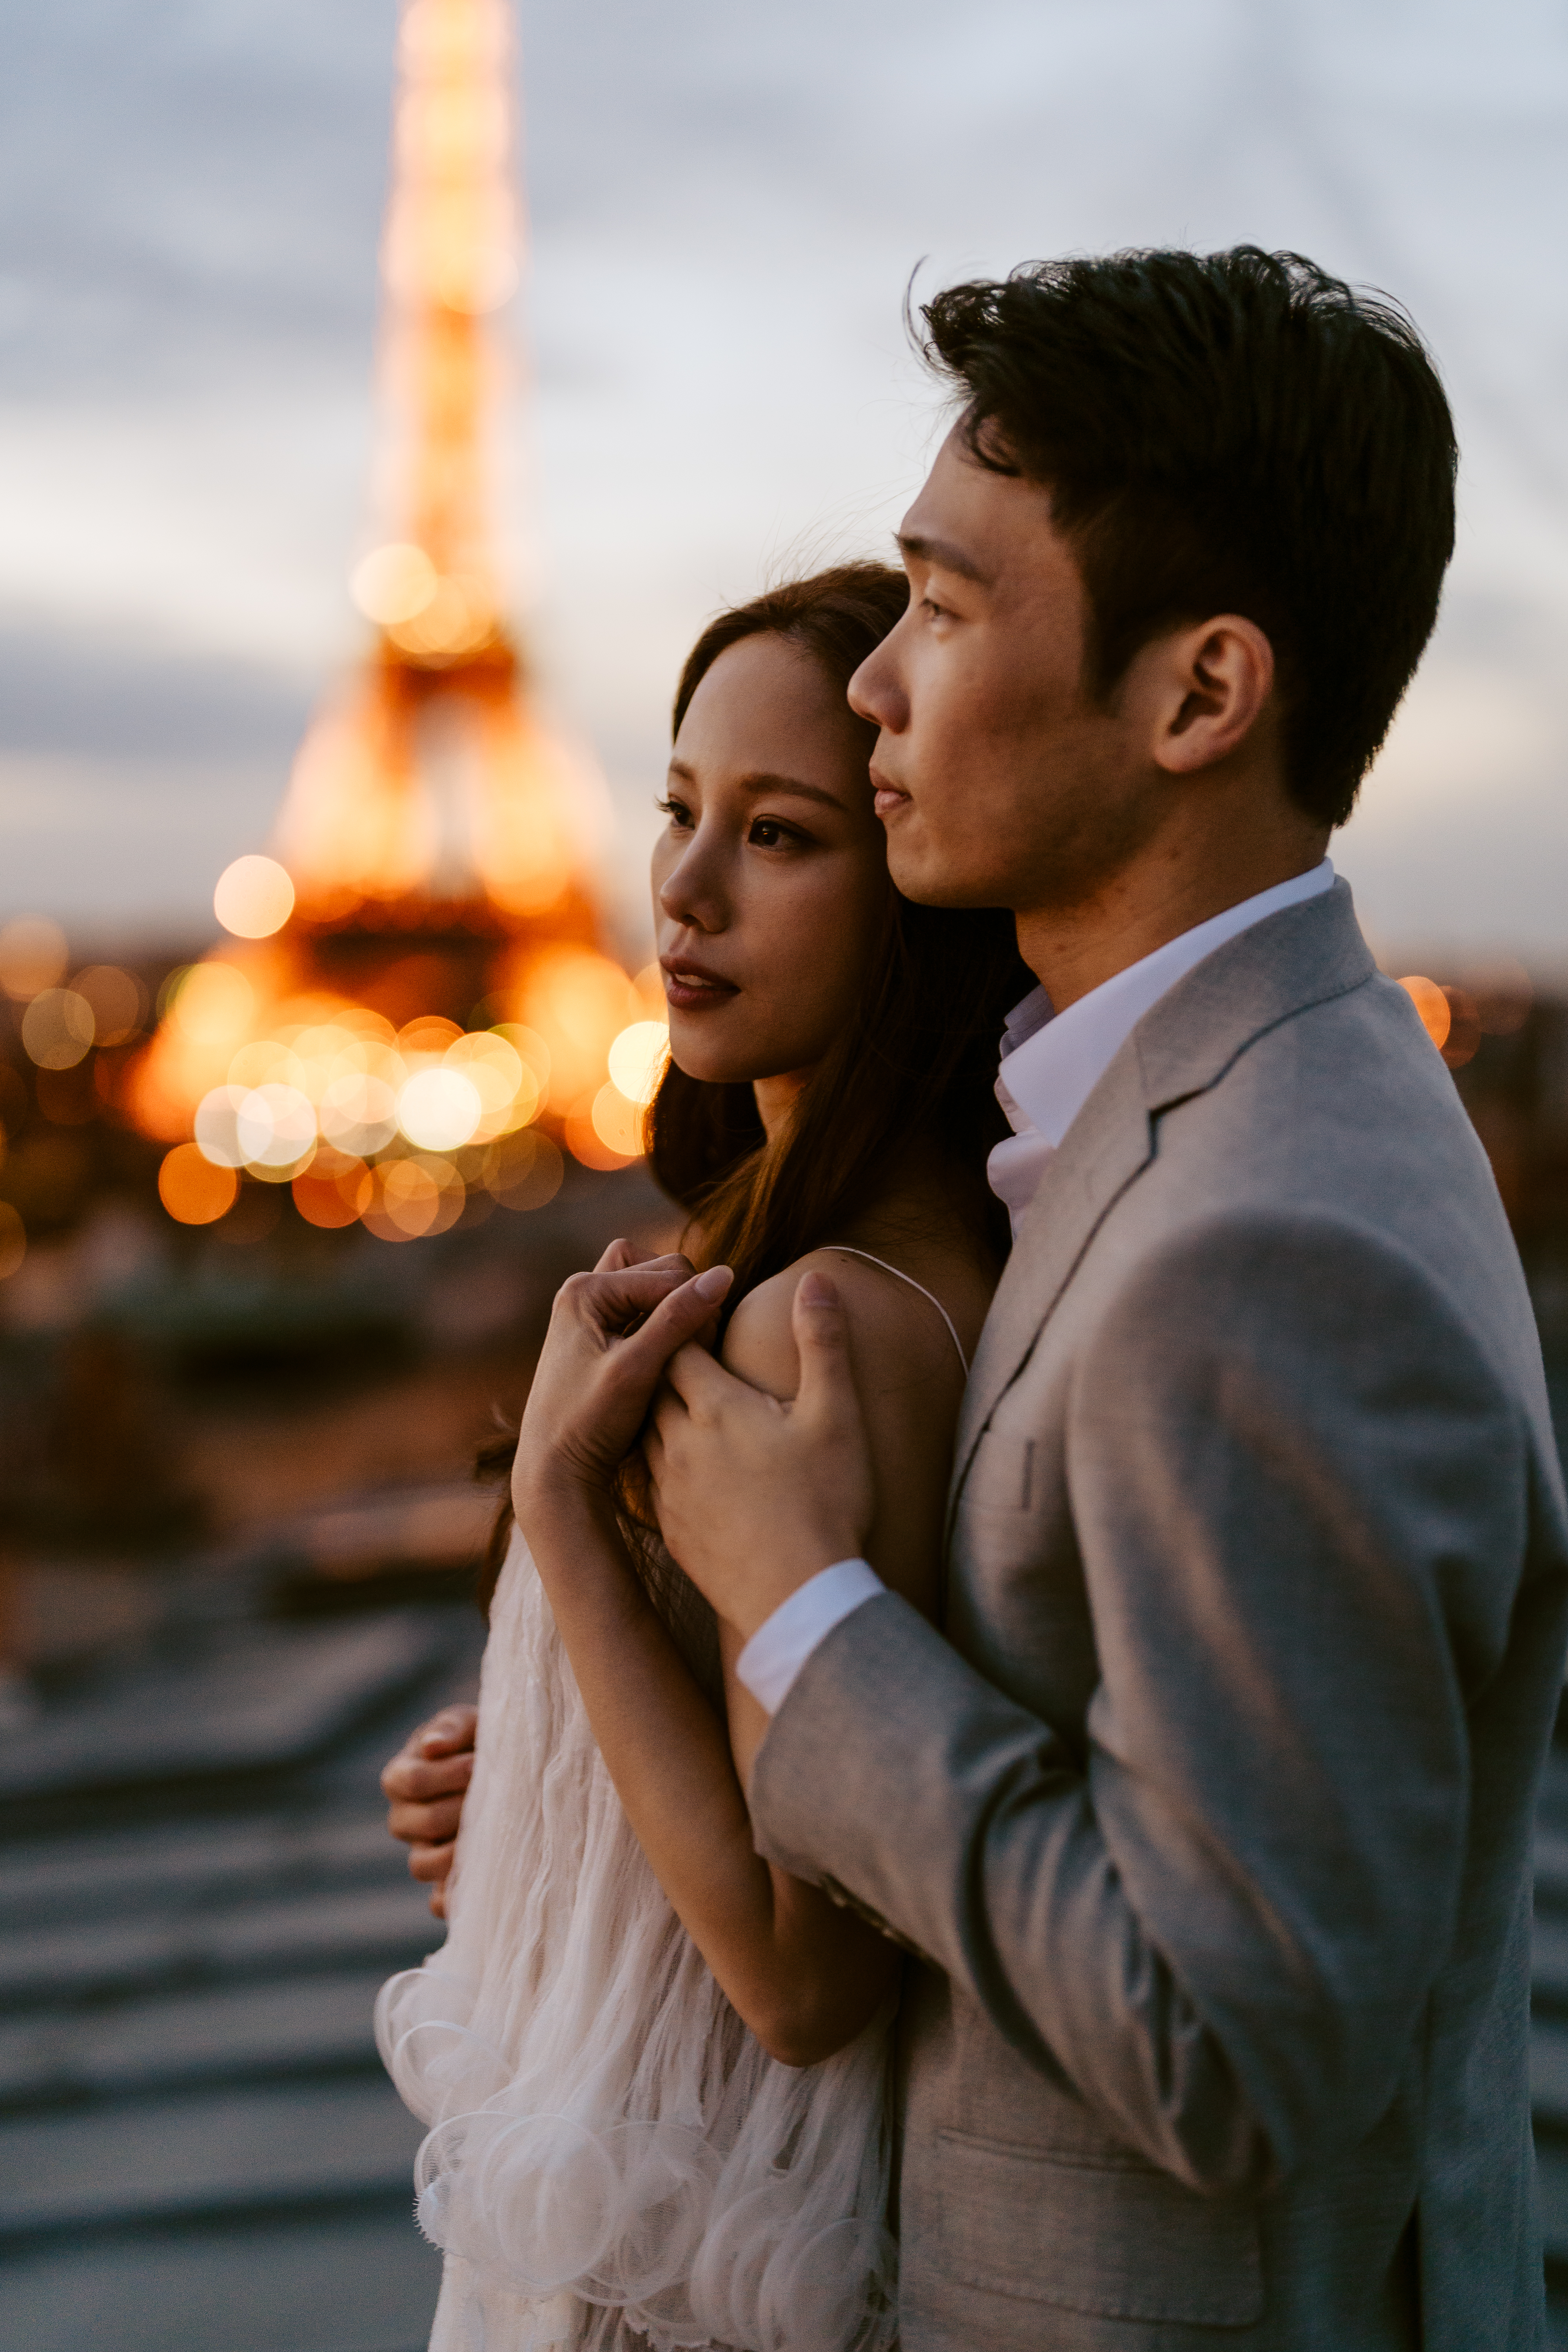 Couples Sunset Pre-wedding Photoshoot in Parisian rooftop with Eiffel tower view 